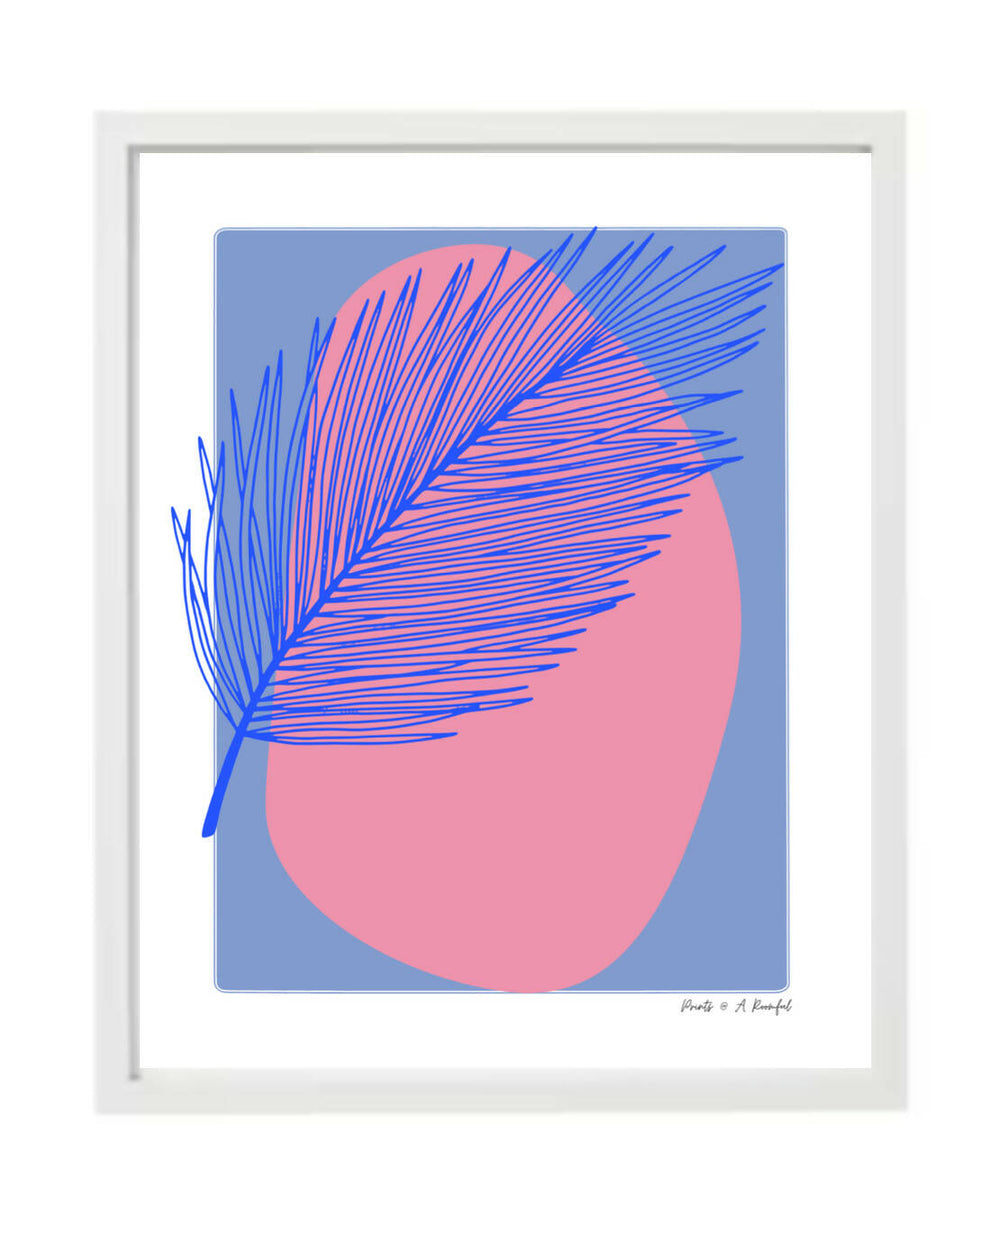 Wall art print : Inspired by nature (Blue) Prints Prints@ARoomful 